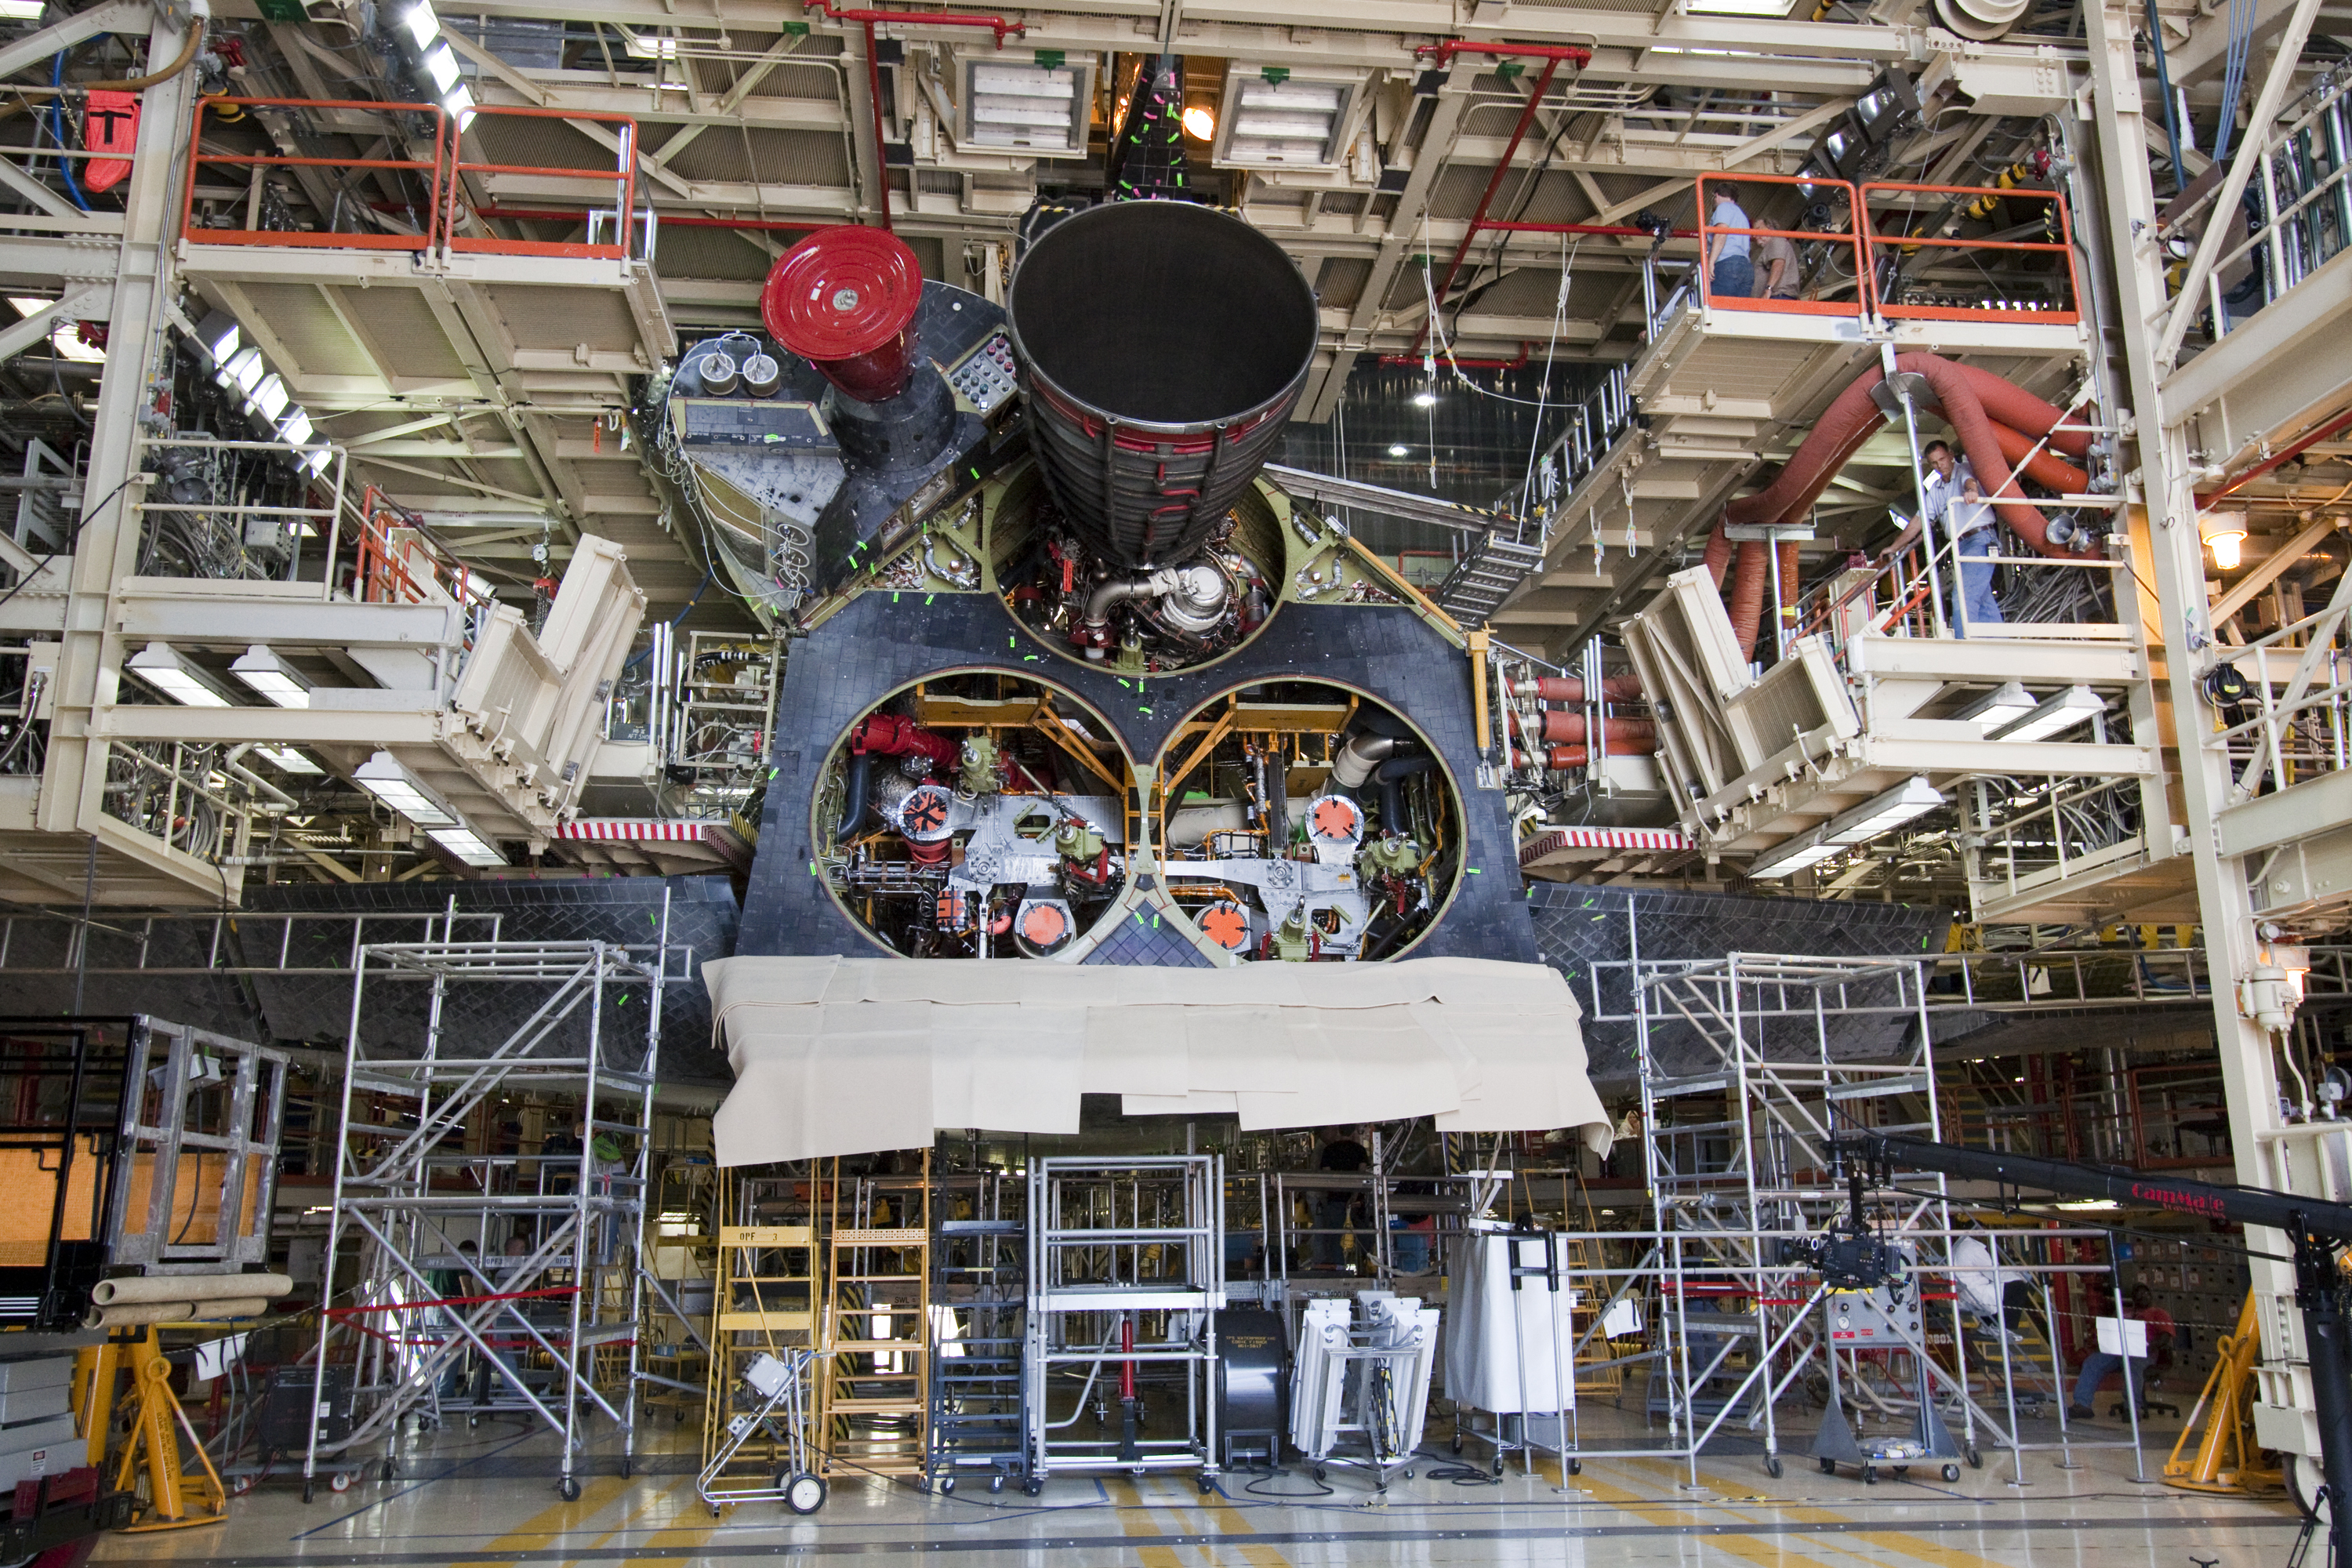 STS-133 Discovery outfitted with one SSME